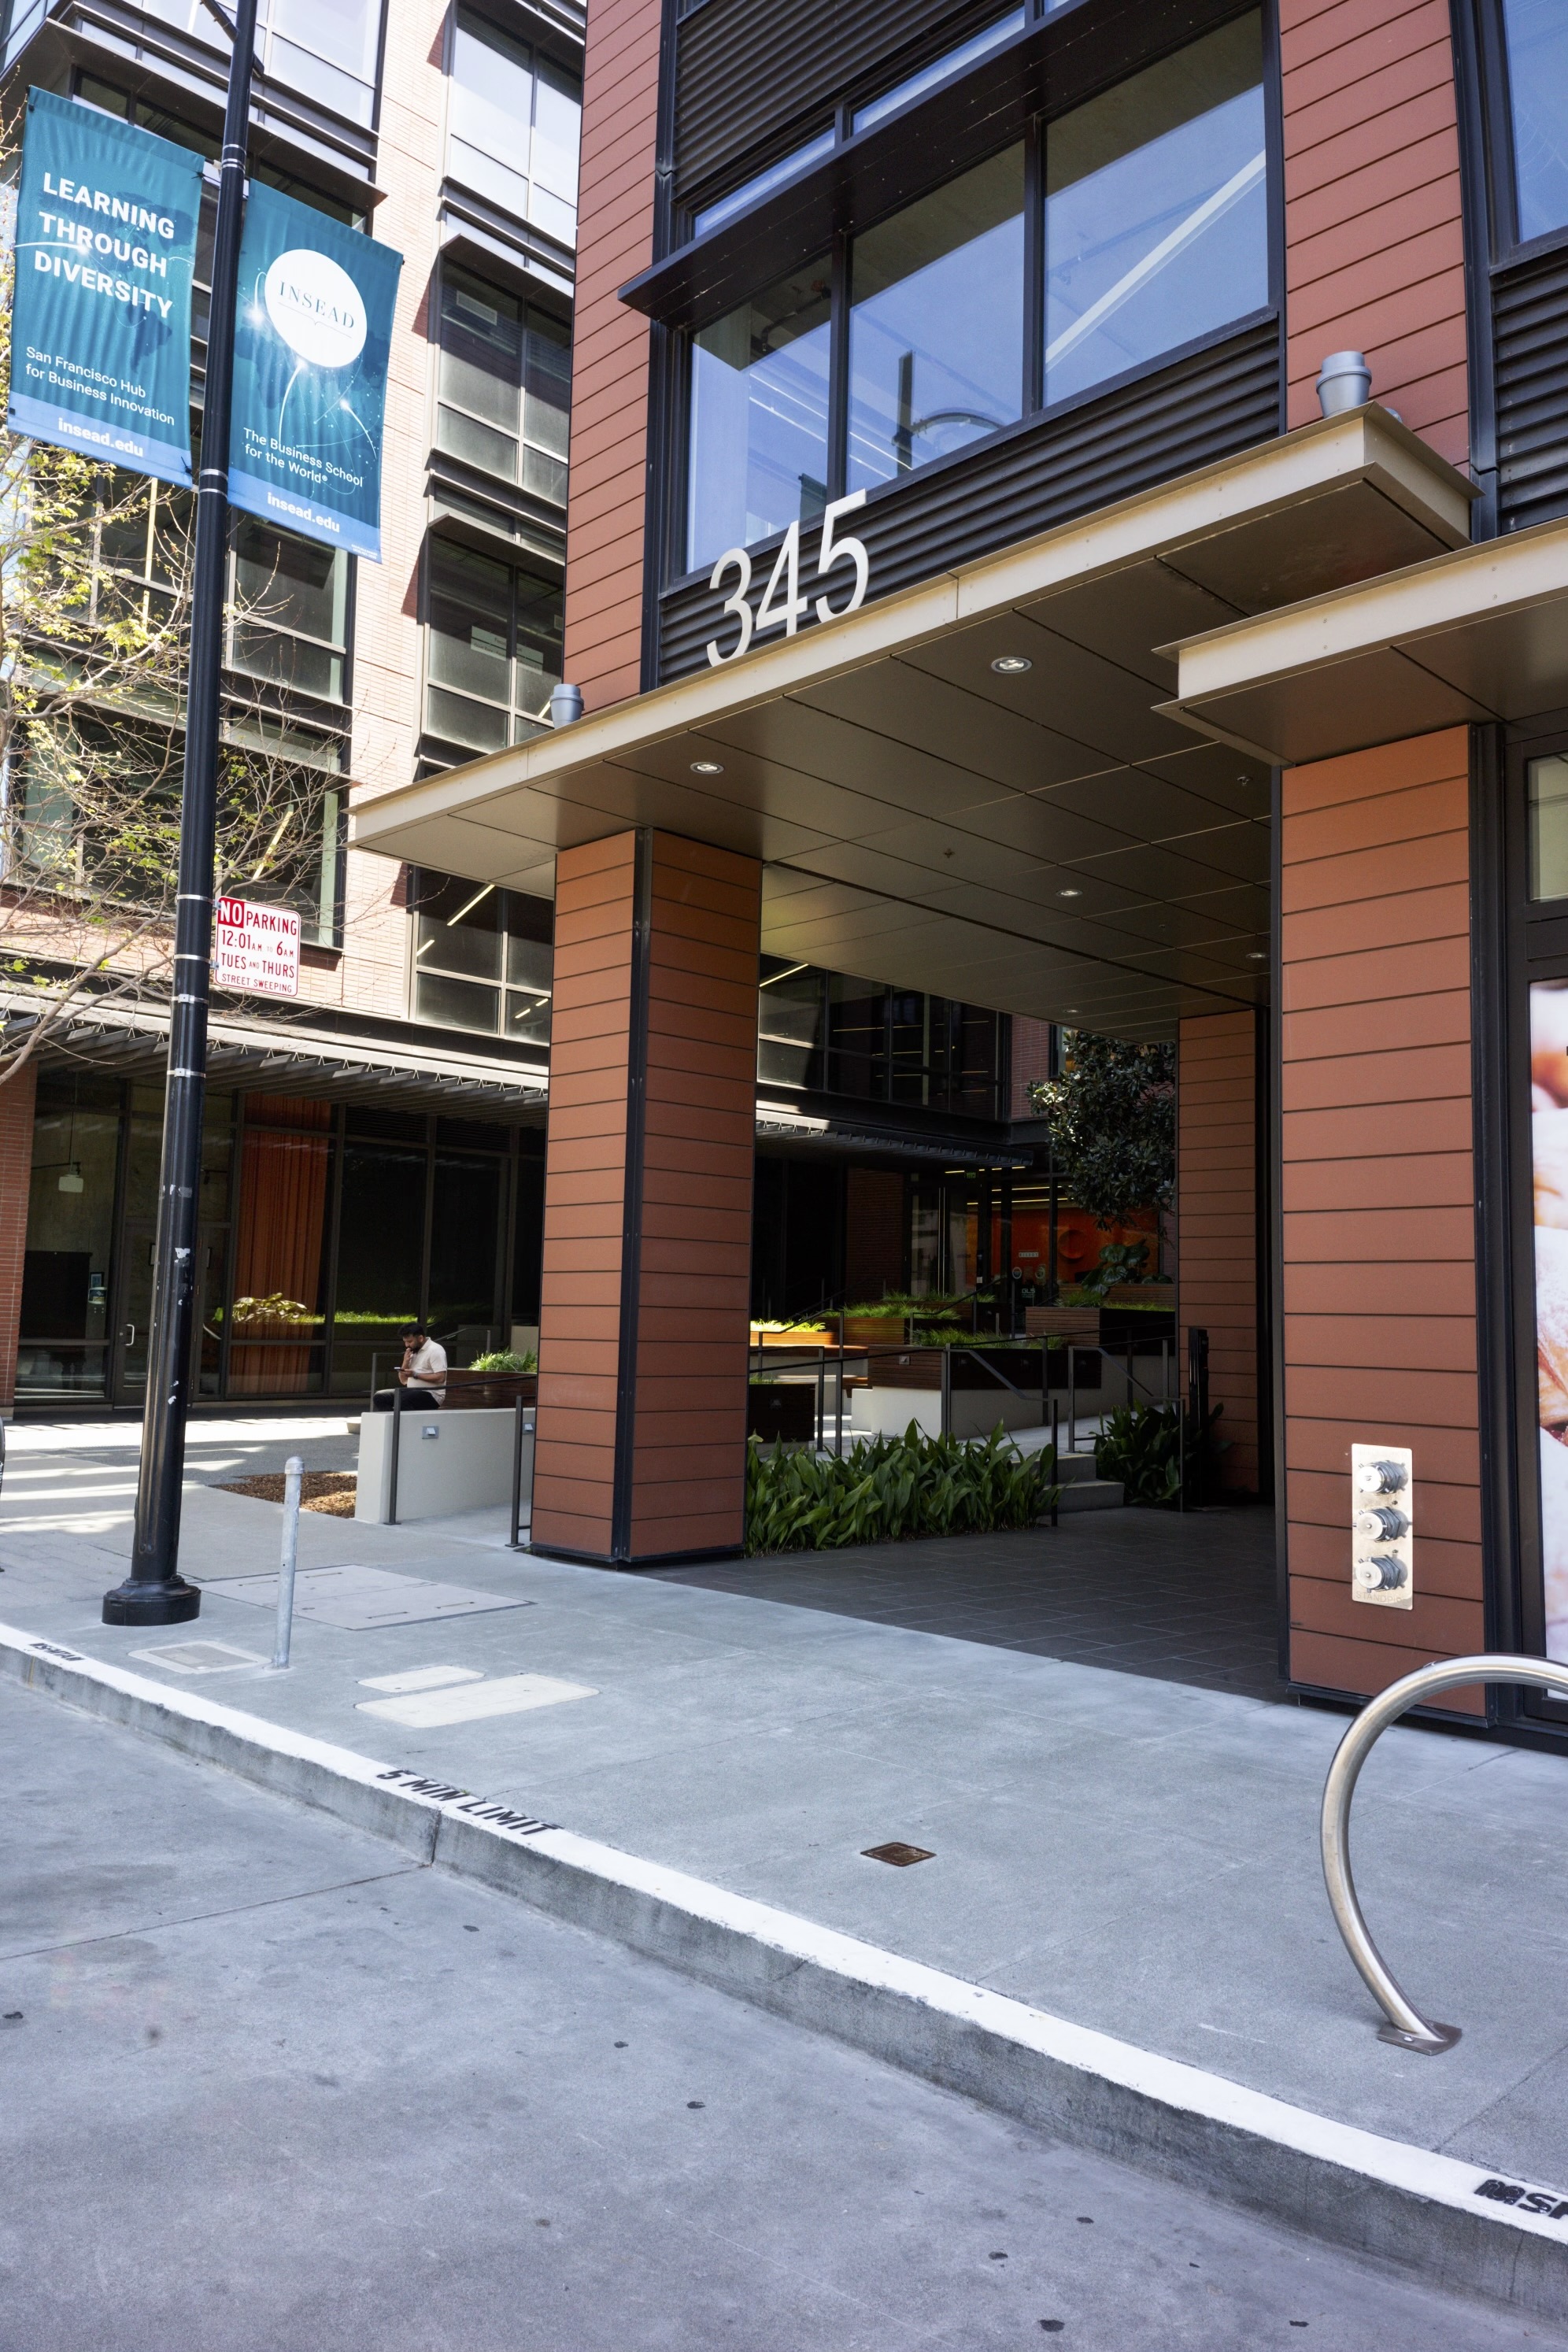 An urban building entrance with a large &quot;345&quot; sign, a banner, a no parking sign, and a bike rack.